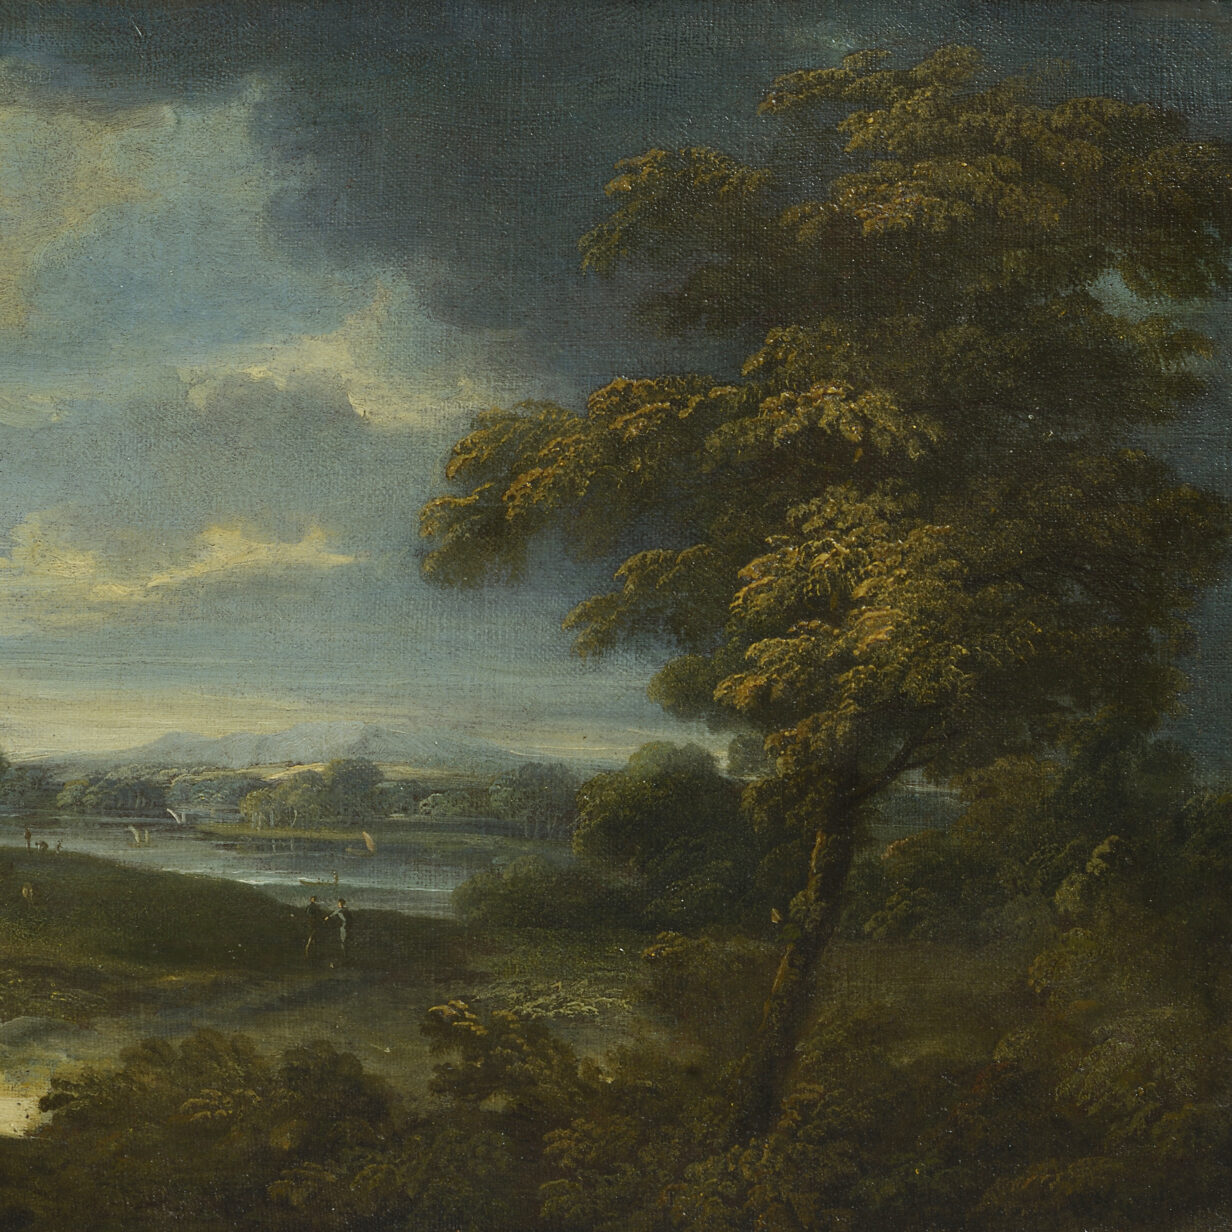 Follower of salvator rosa, an extensive pastoral landscape with lake, 18th century oil on canvas